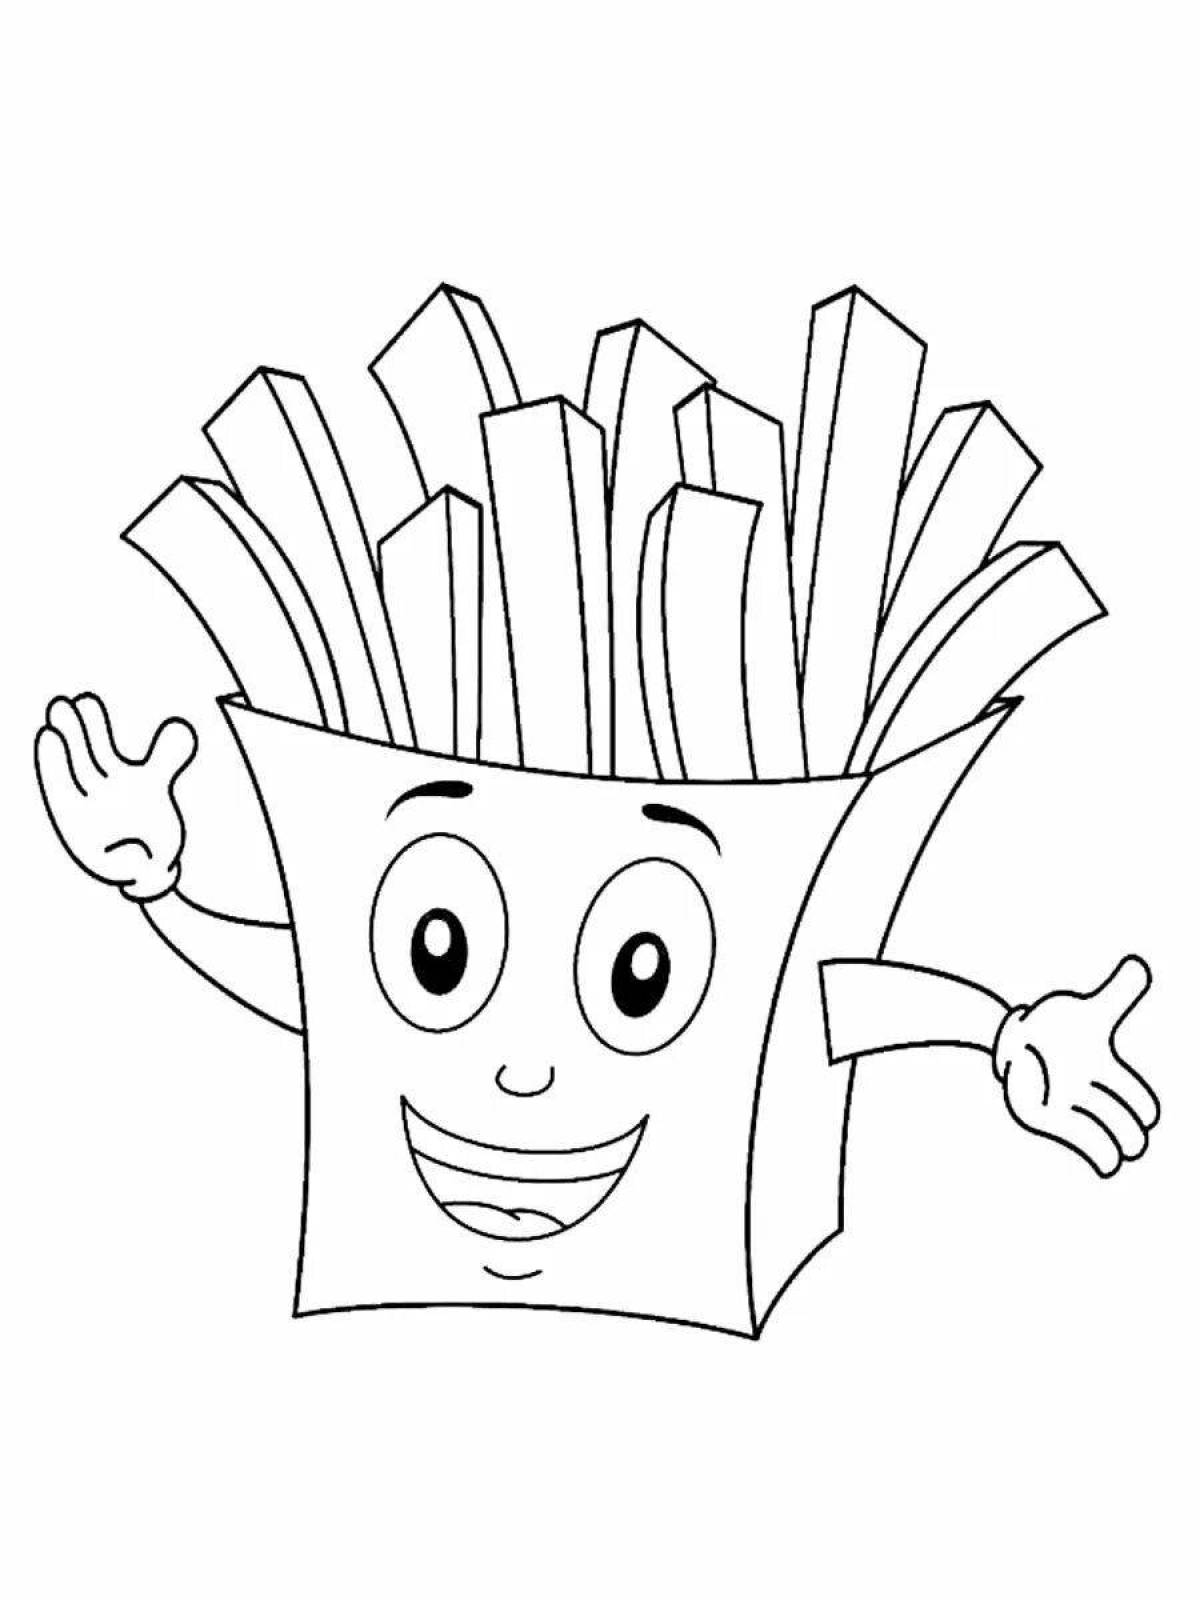 Coloring pages with playful chips for kids